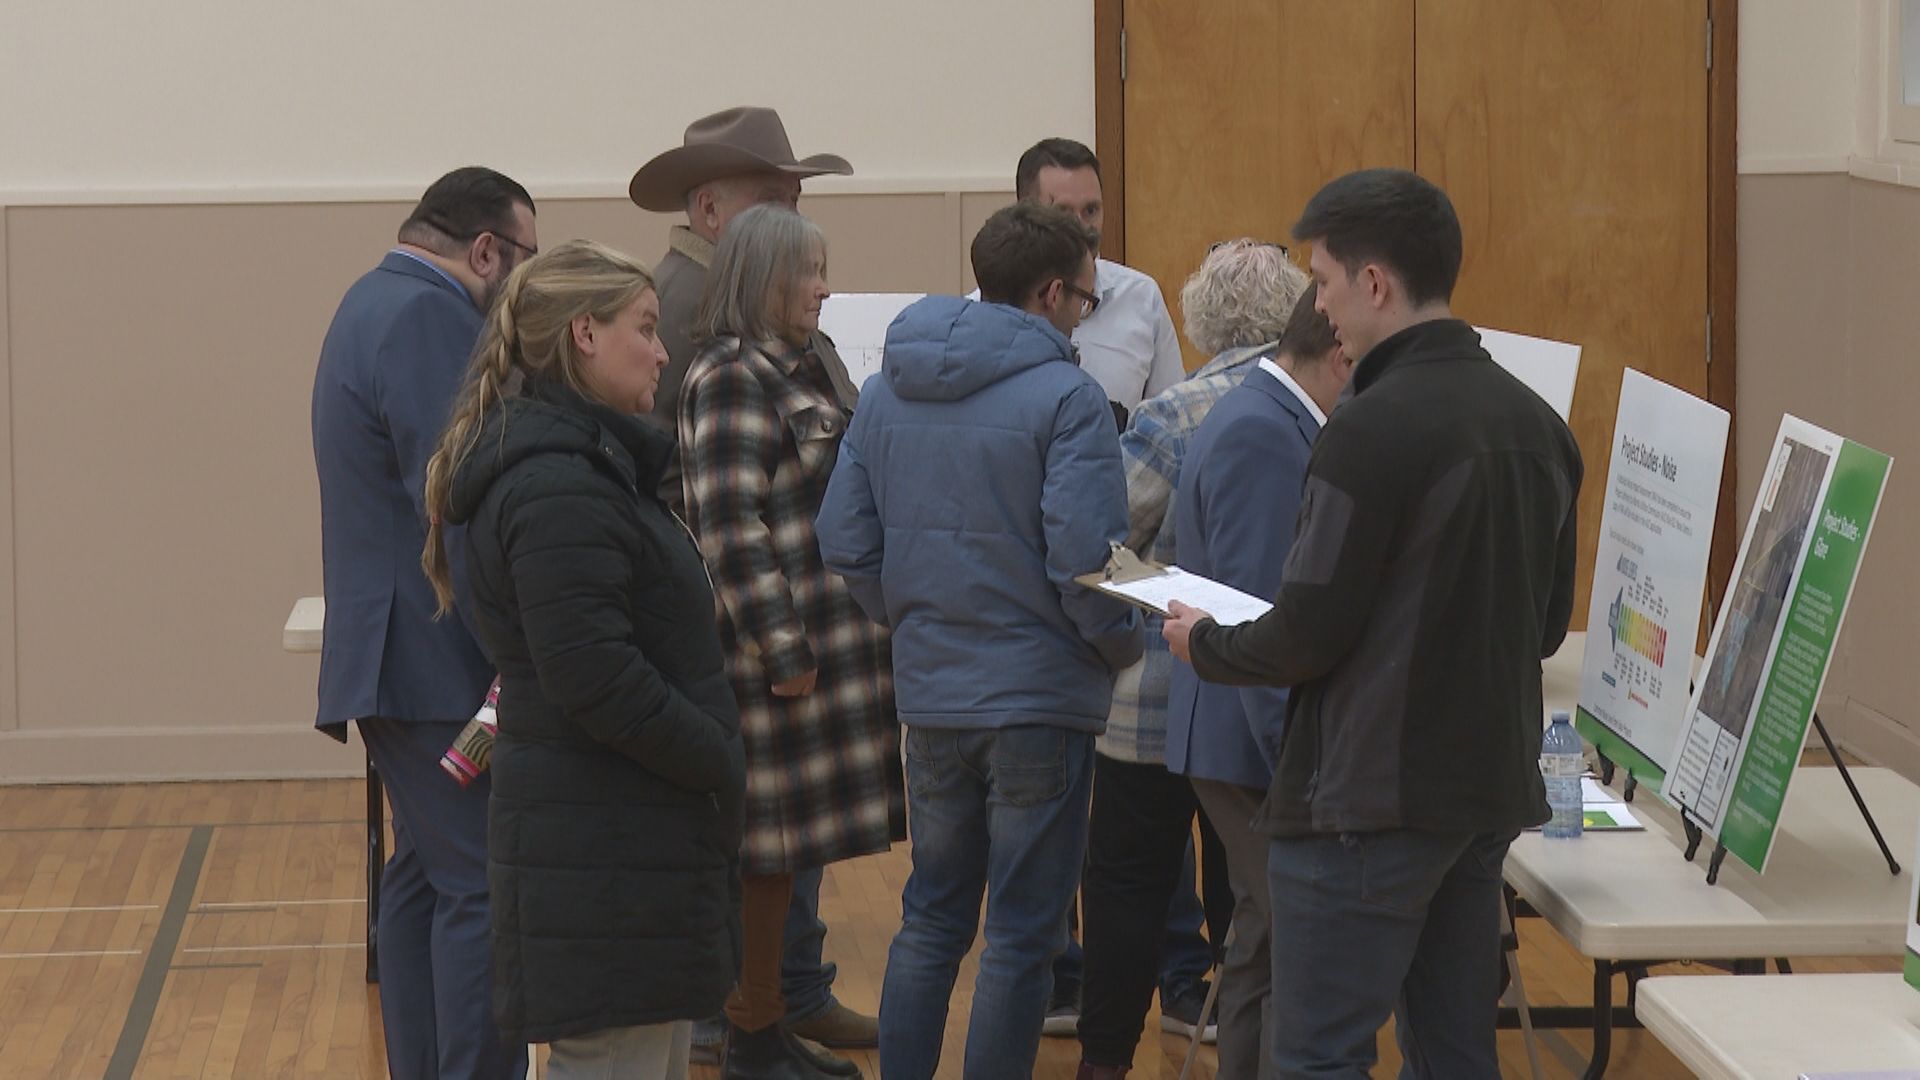 Solar farm projects proposed in Lethbridge County met with opposition